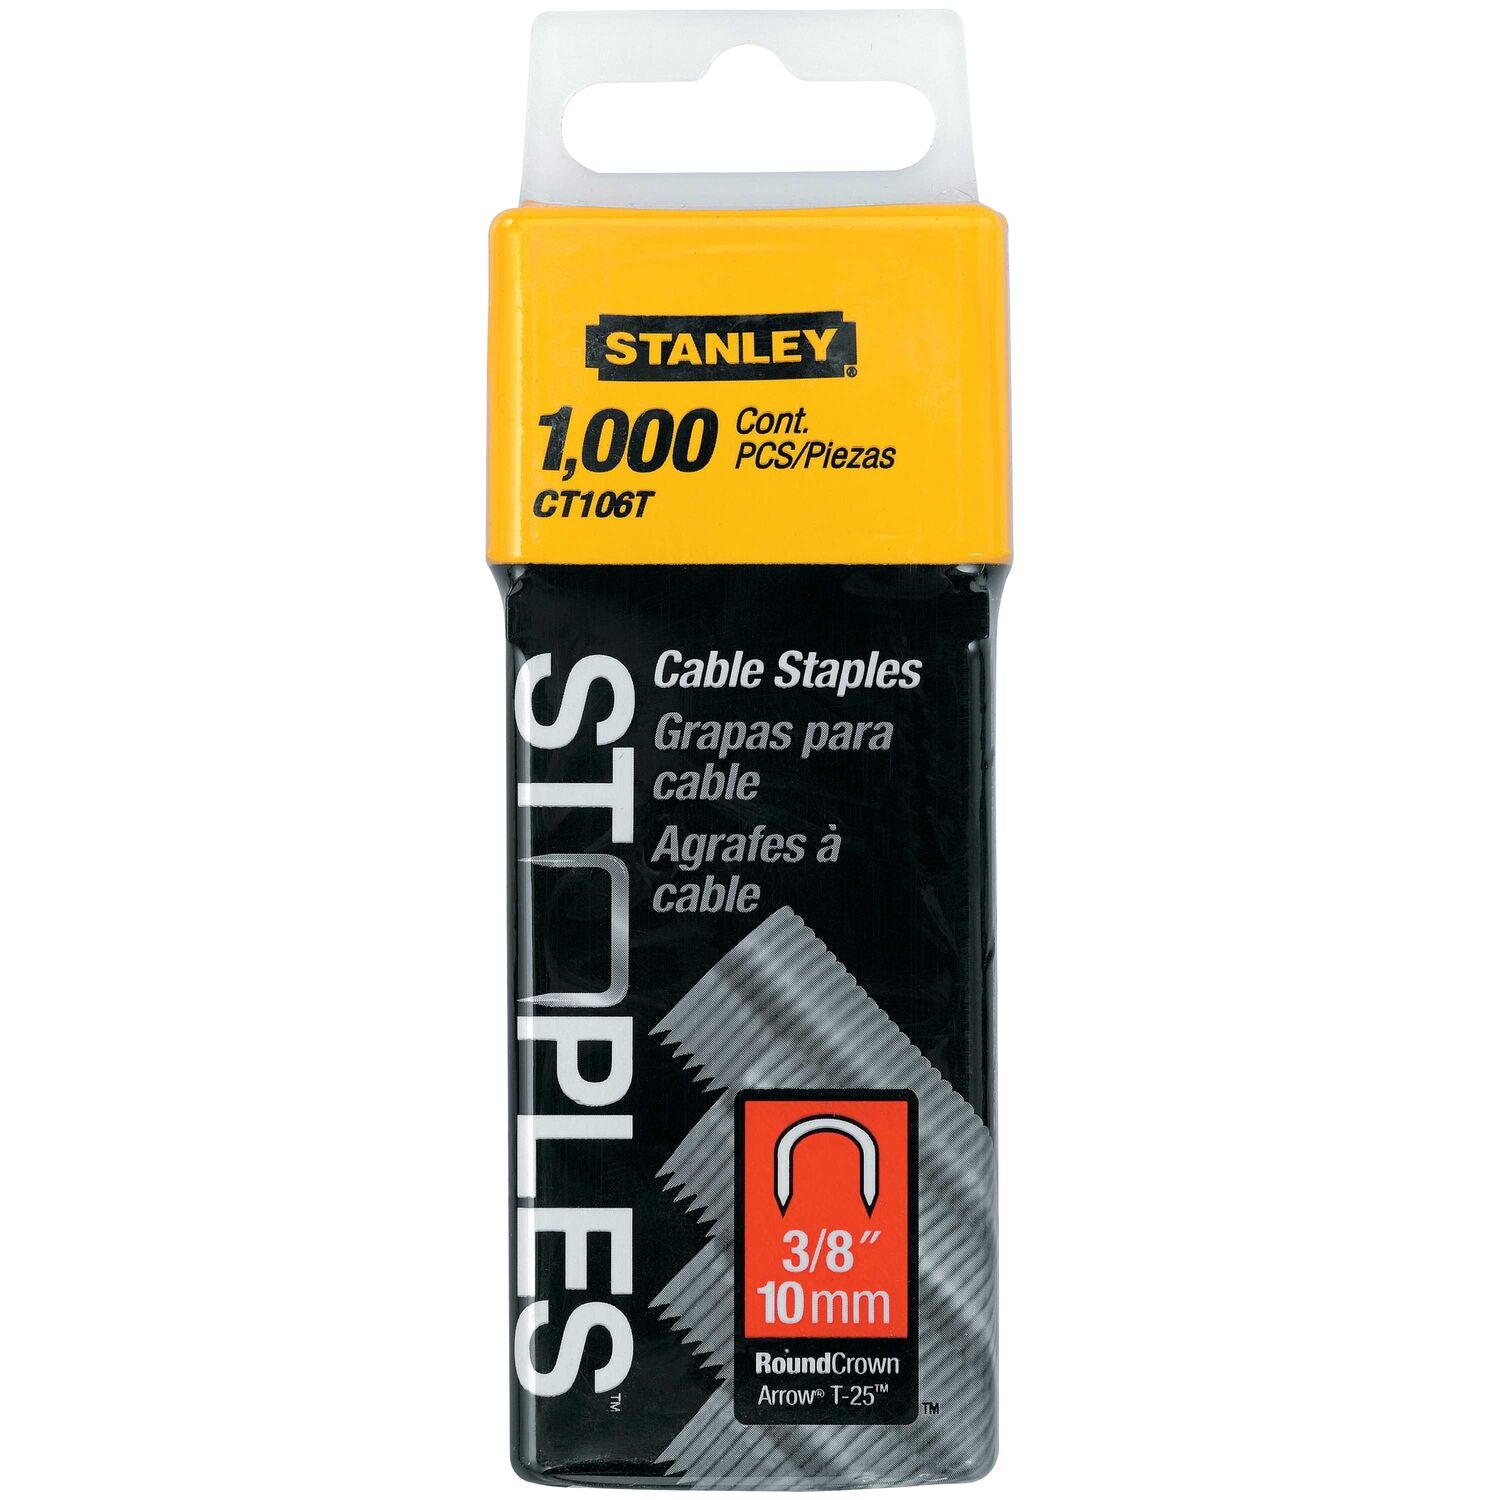 Stabley CT106T - 1,000 pc 3/8 in Cable Staples